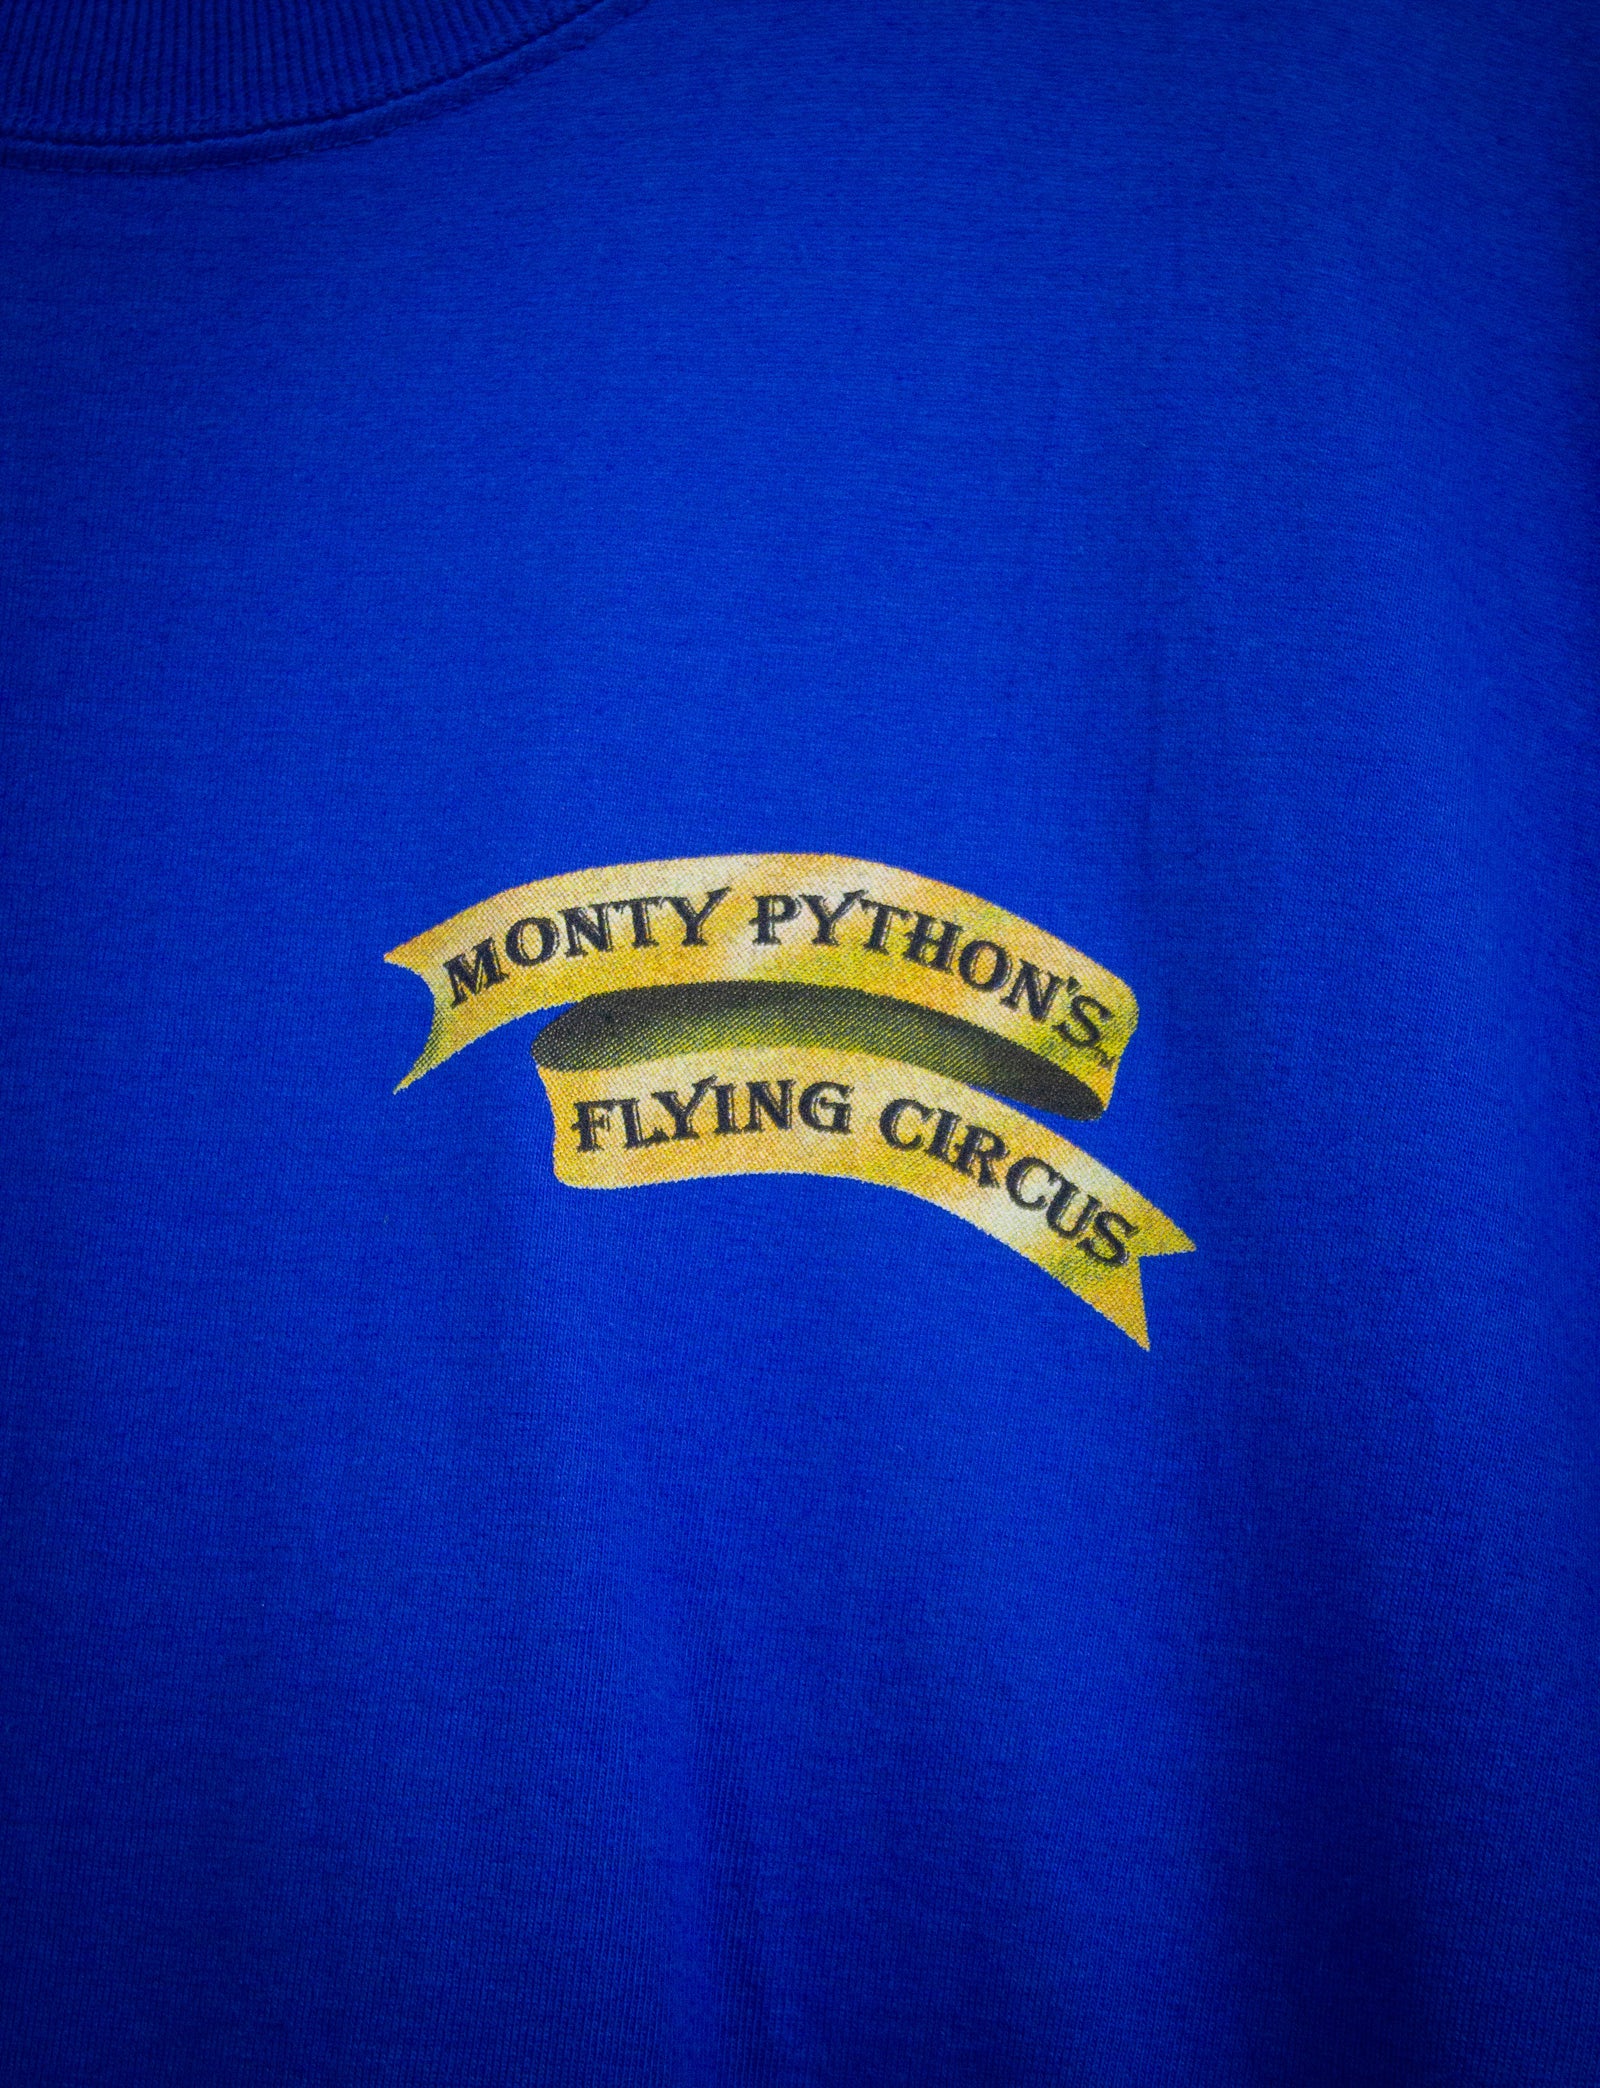 Vintage Monty Python Flying Circus Graphic T Shirt 2003 Blue Large